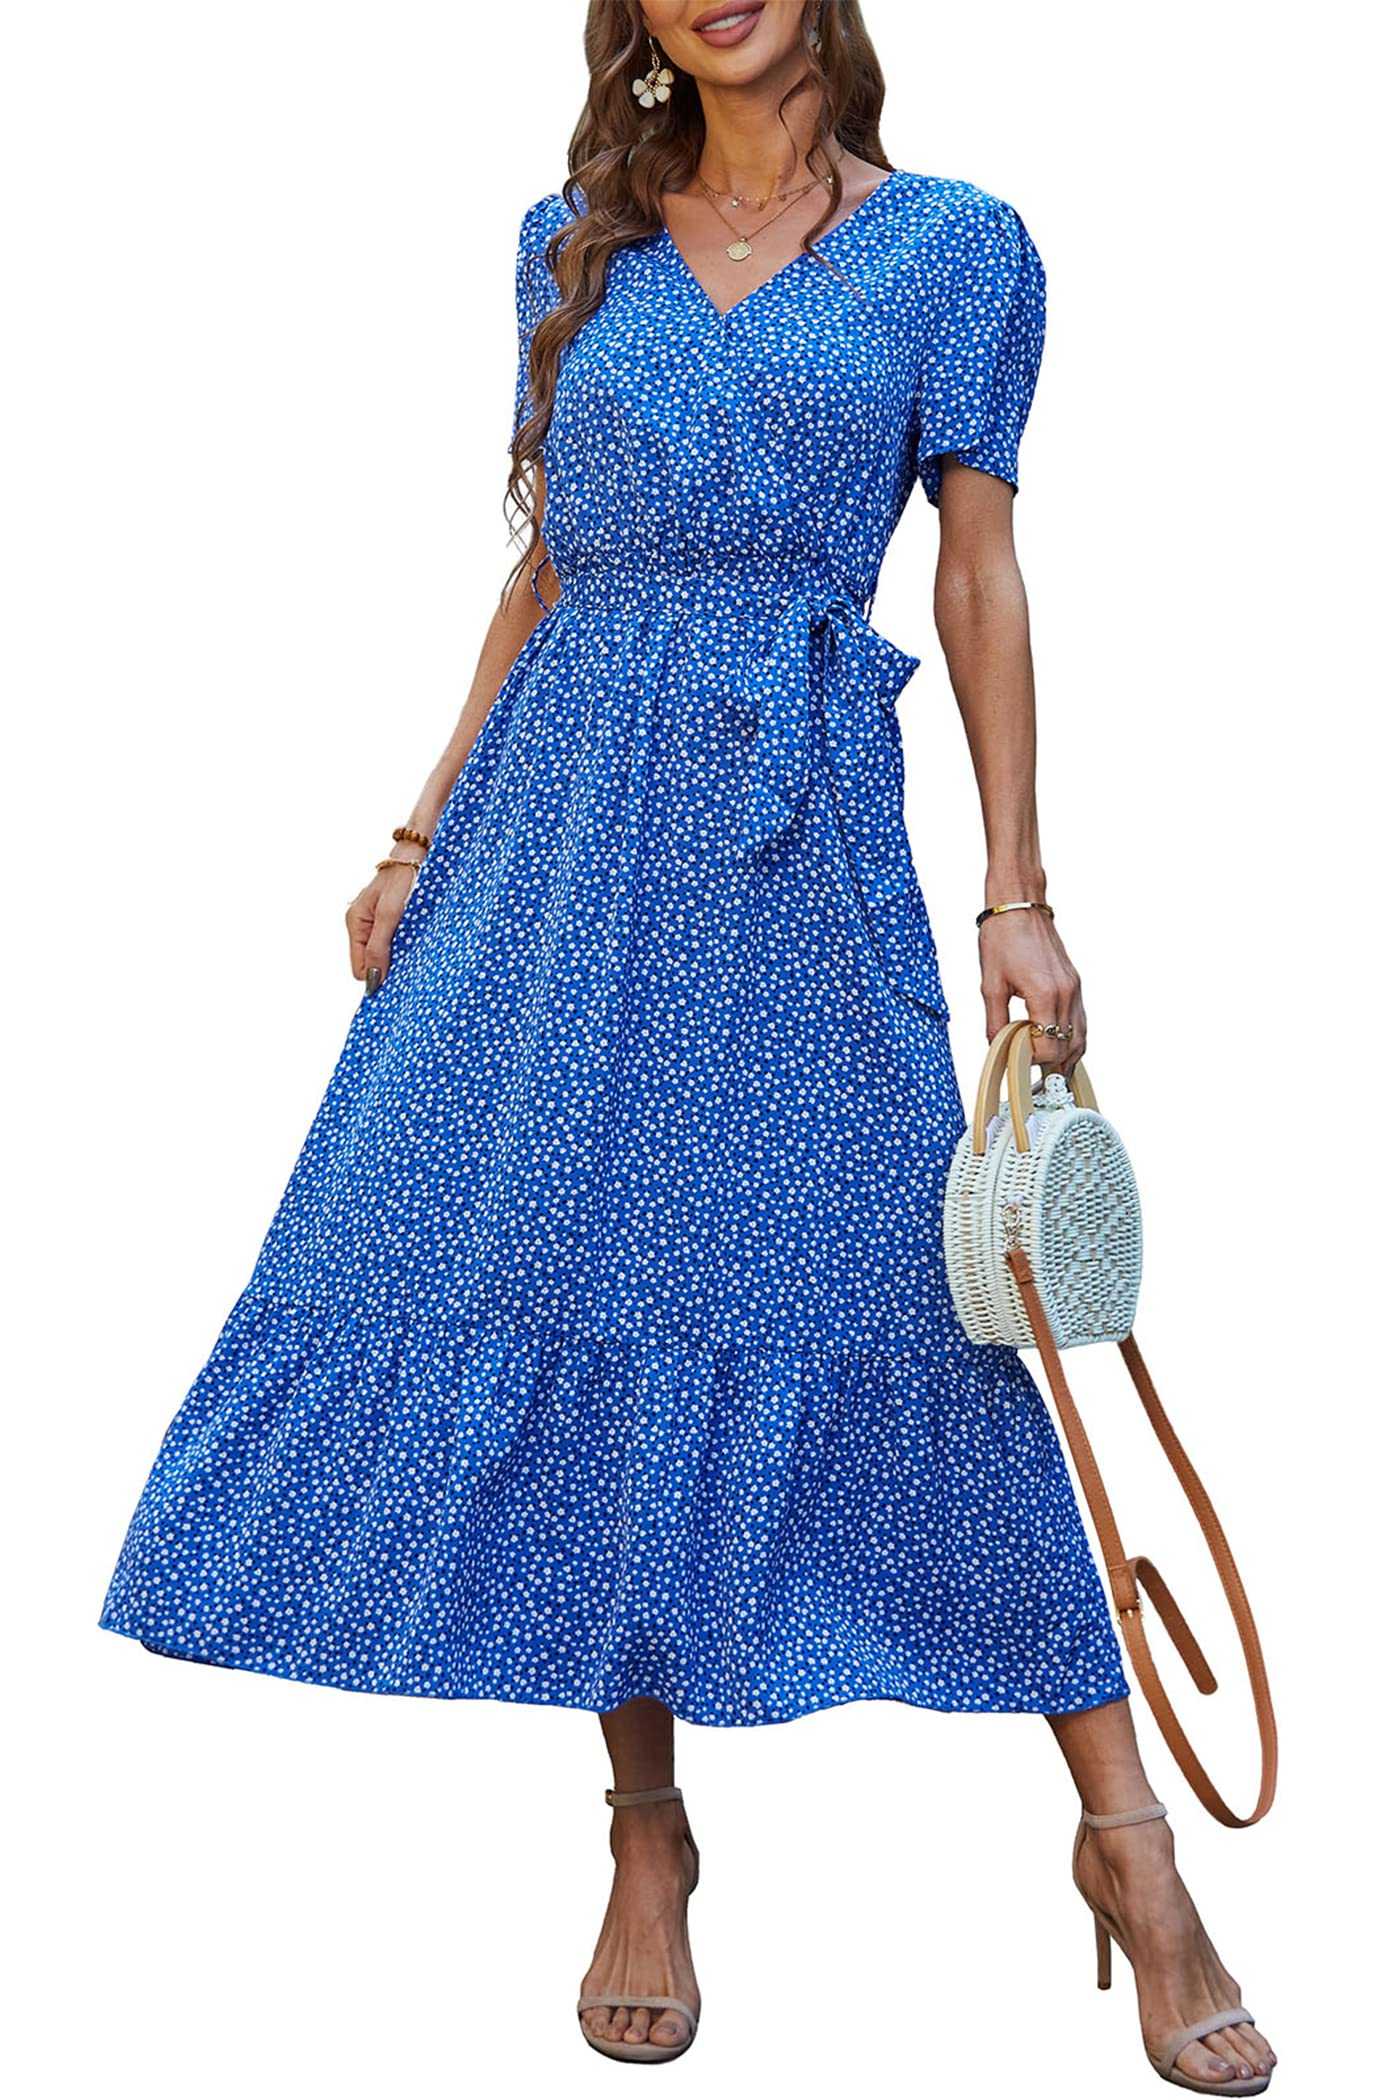 Easter dresses under $50 on Amazon